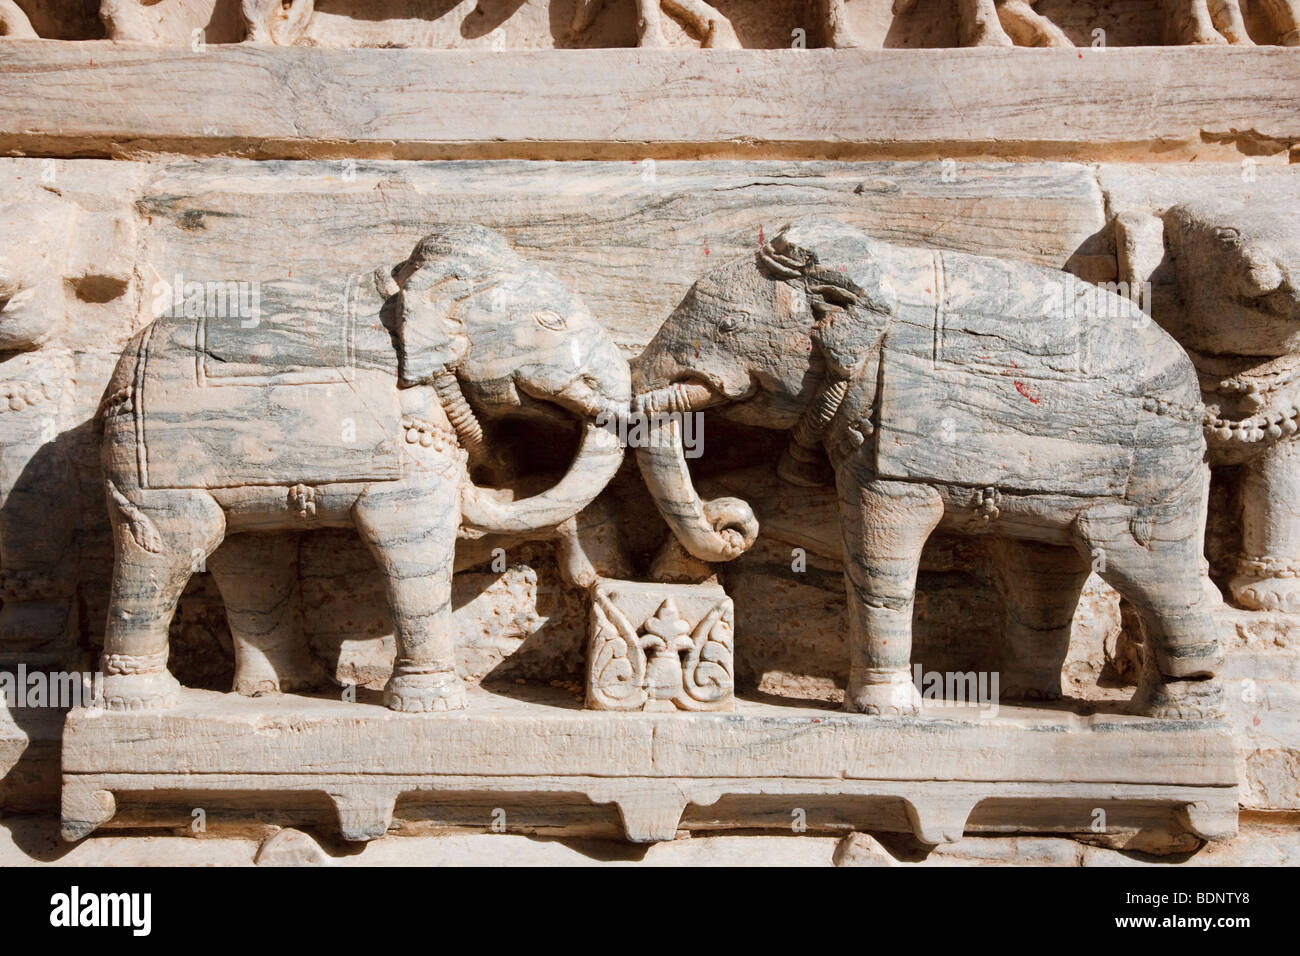 Carved elephants on the exterior wall of Jagdish Temple, Udaipur, India Stock Photo